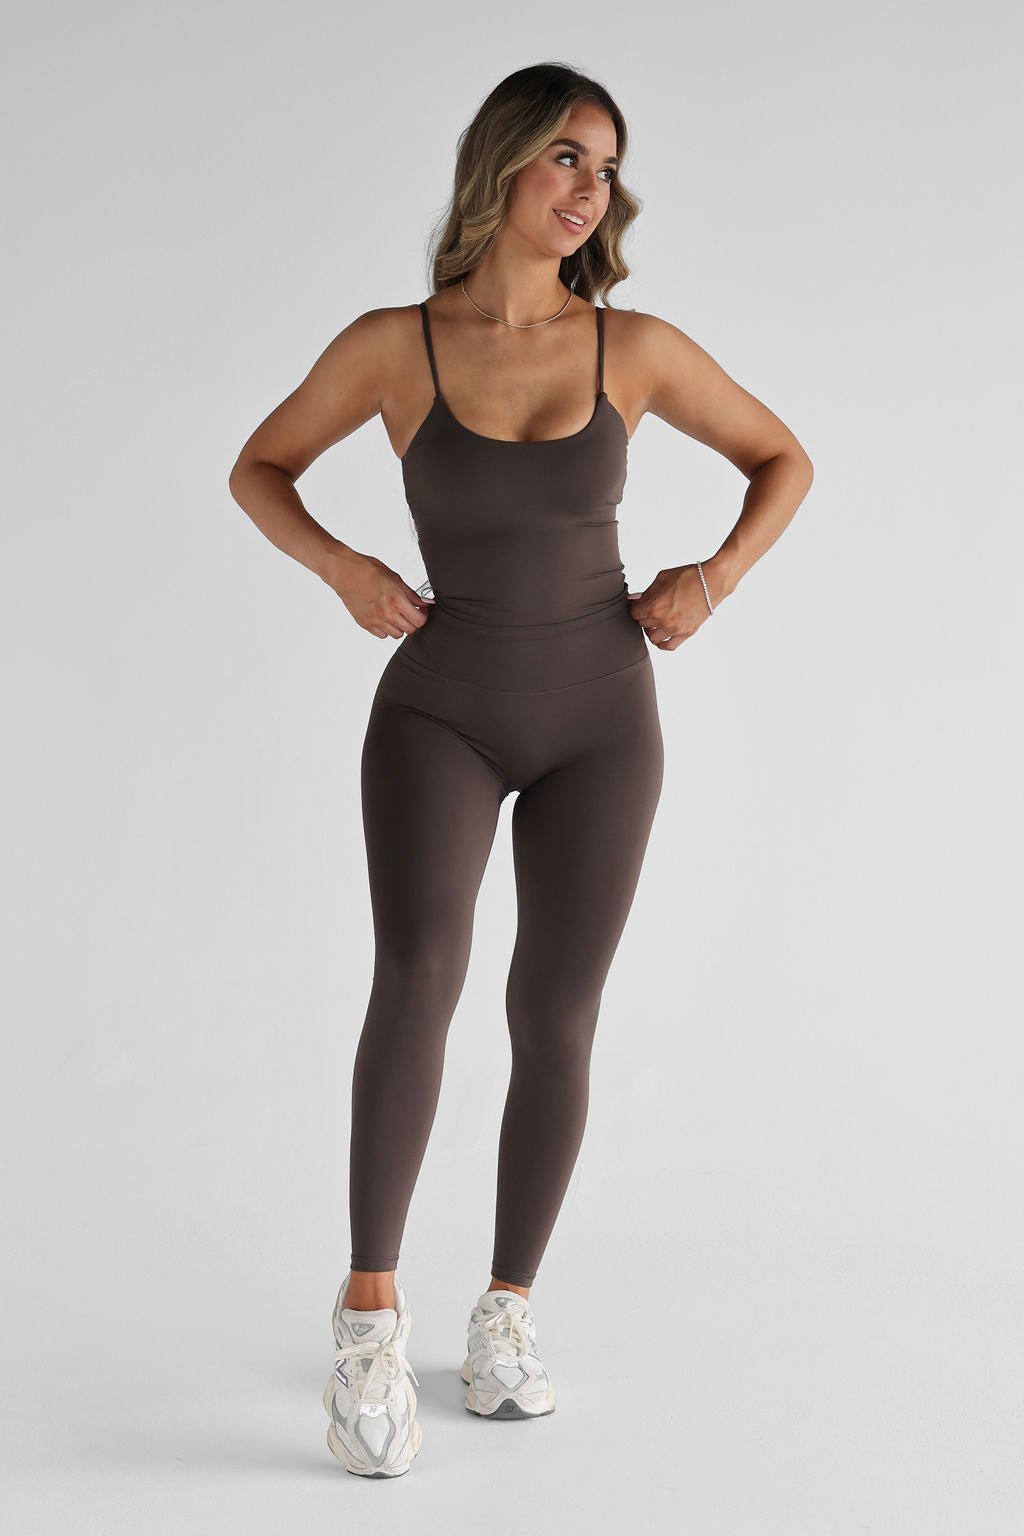 SCULPT Tank - Dark Chocolate SHIPPING FROM 23/08 - 25/08 - LEELO ACTIVE